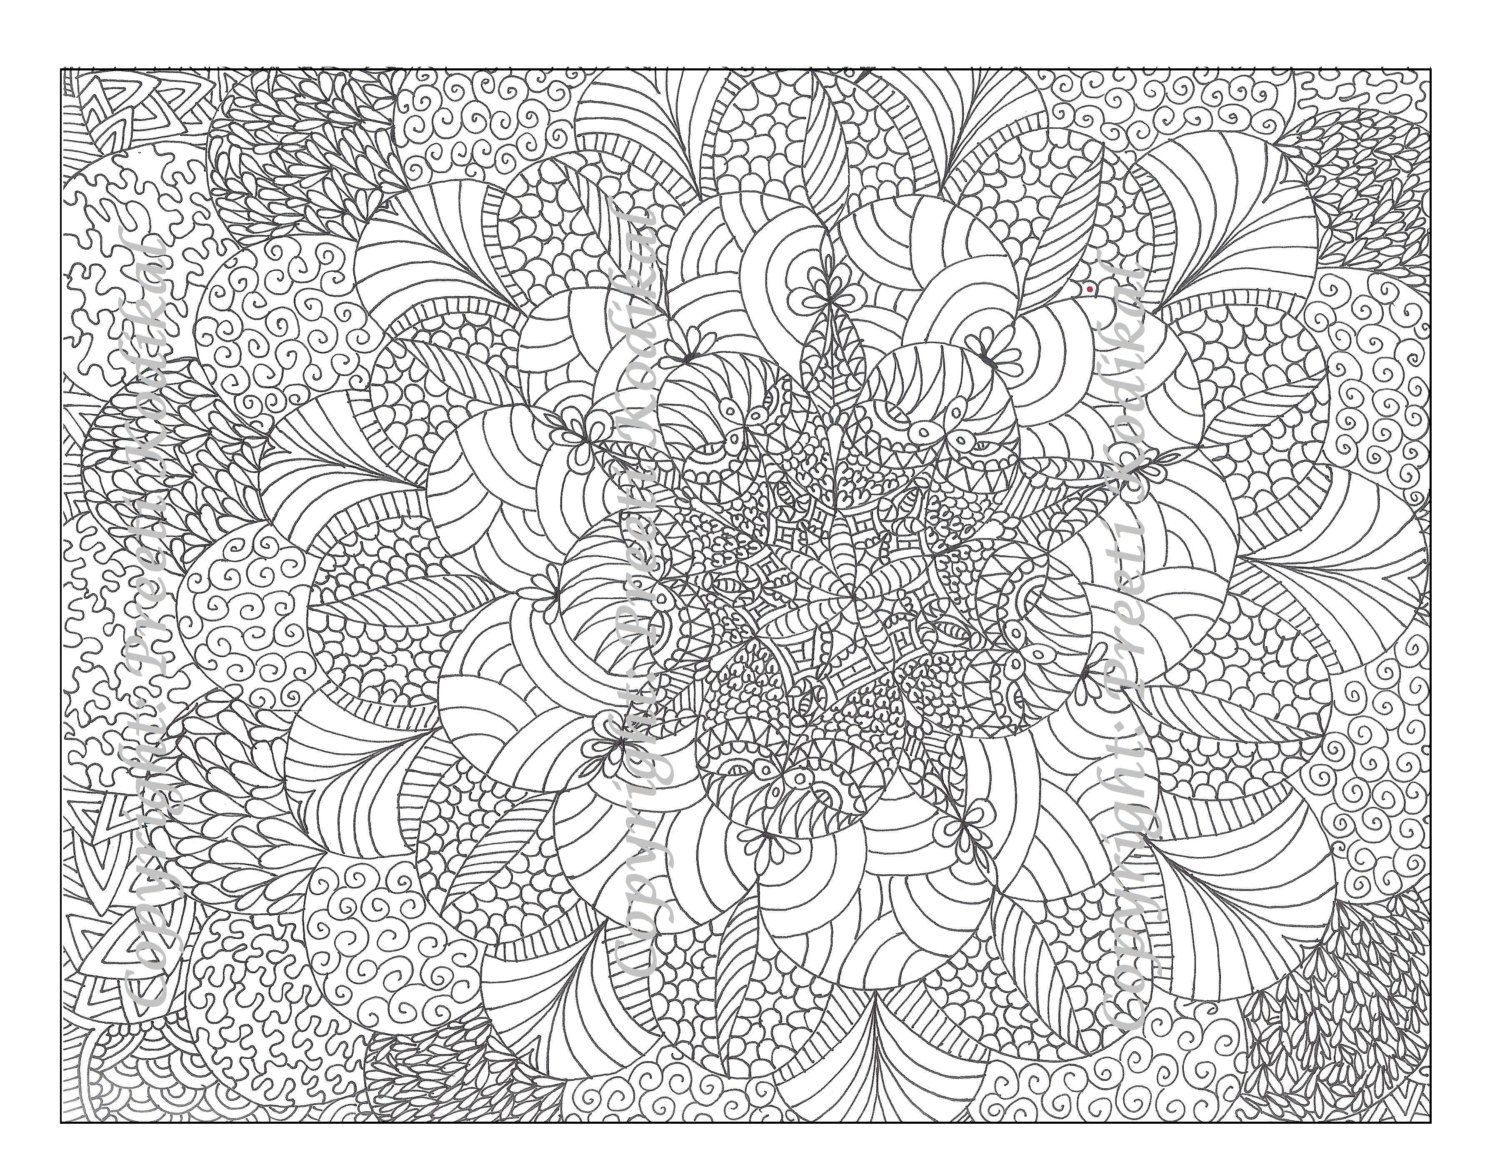 Printable Hard Coloring Pages For S - High Quality Coloring Pages - Free Printable Hard Coloring Pages For Adults